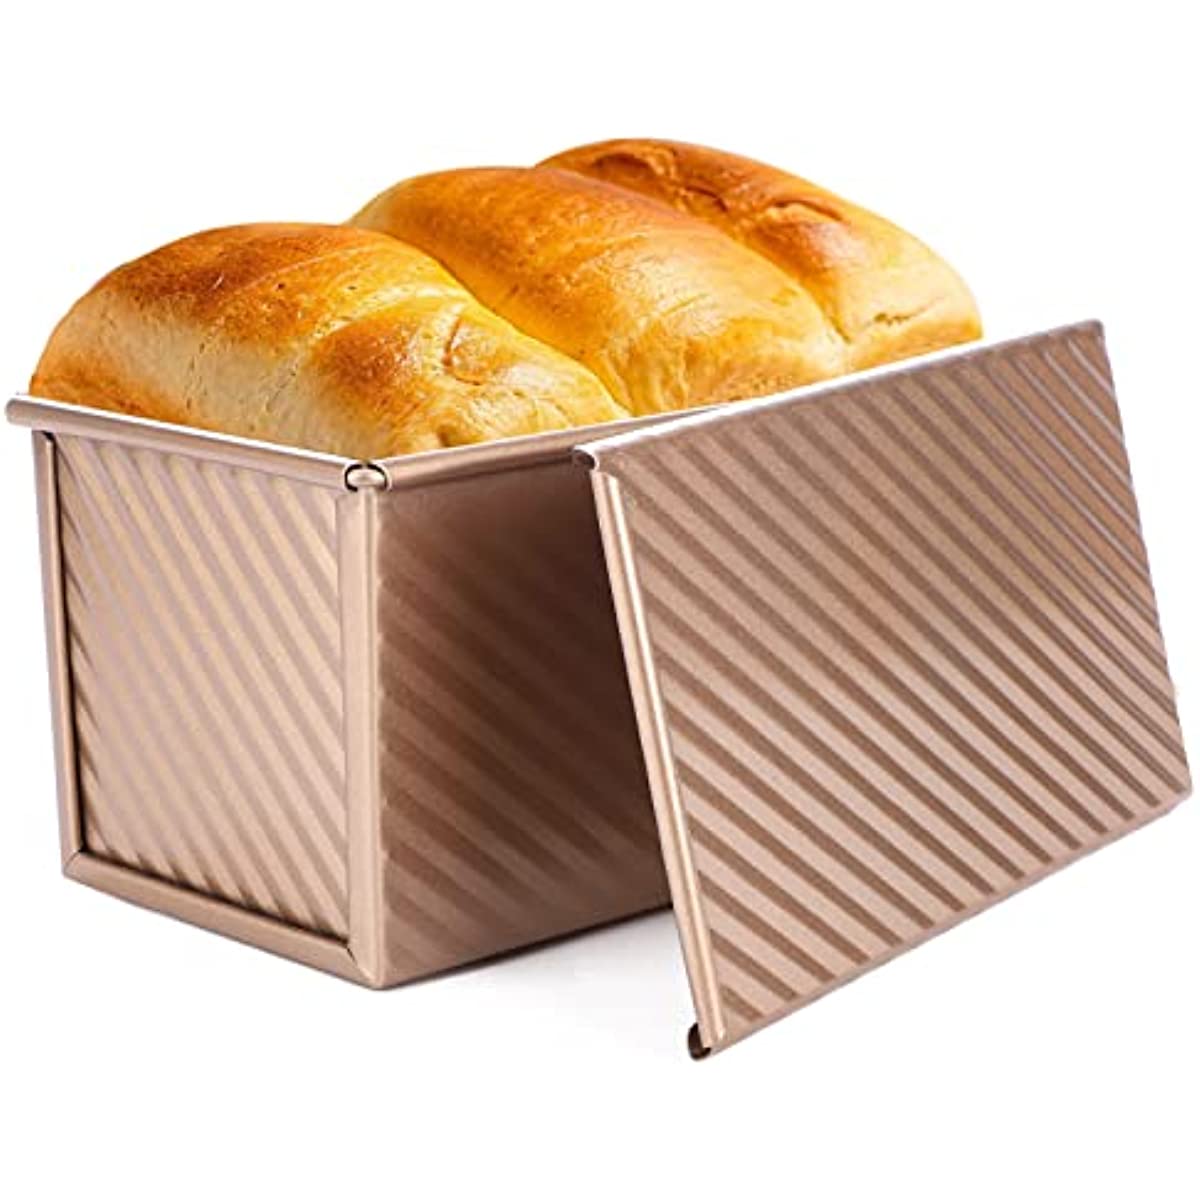 Loaf & Bread Tin, Loaf & Toast Pan with Lid